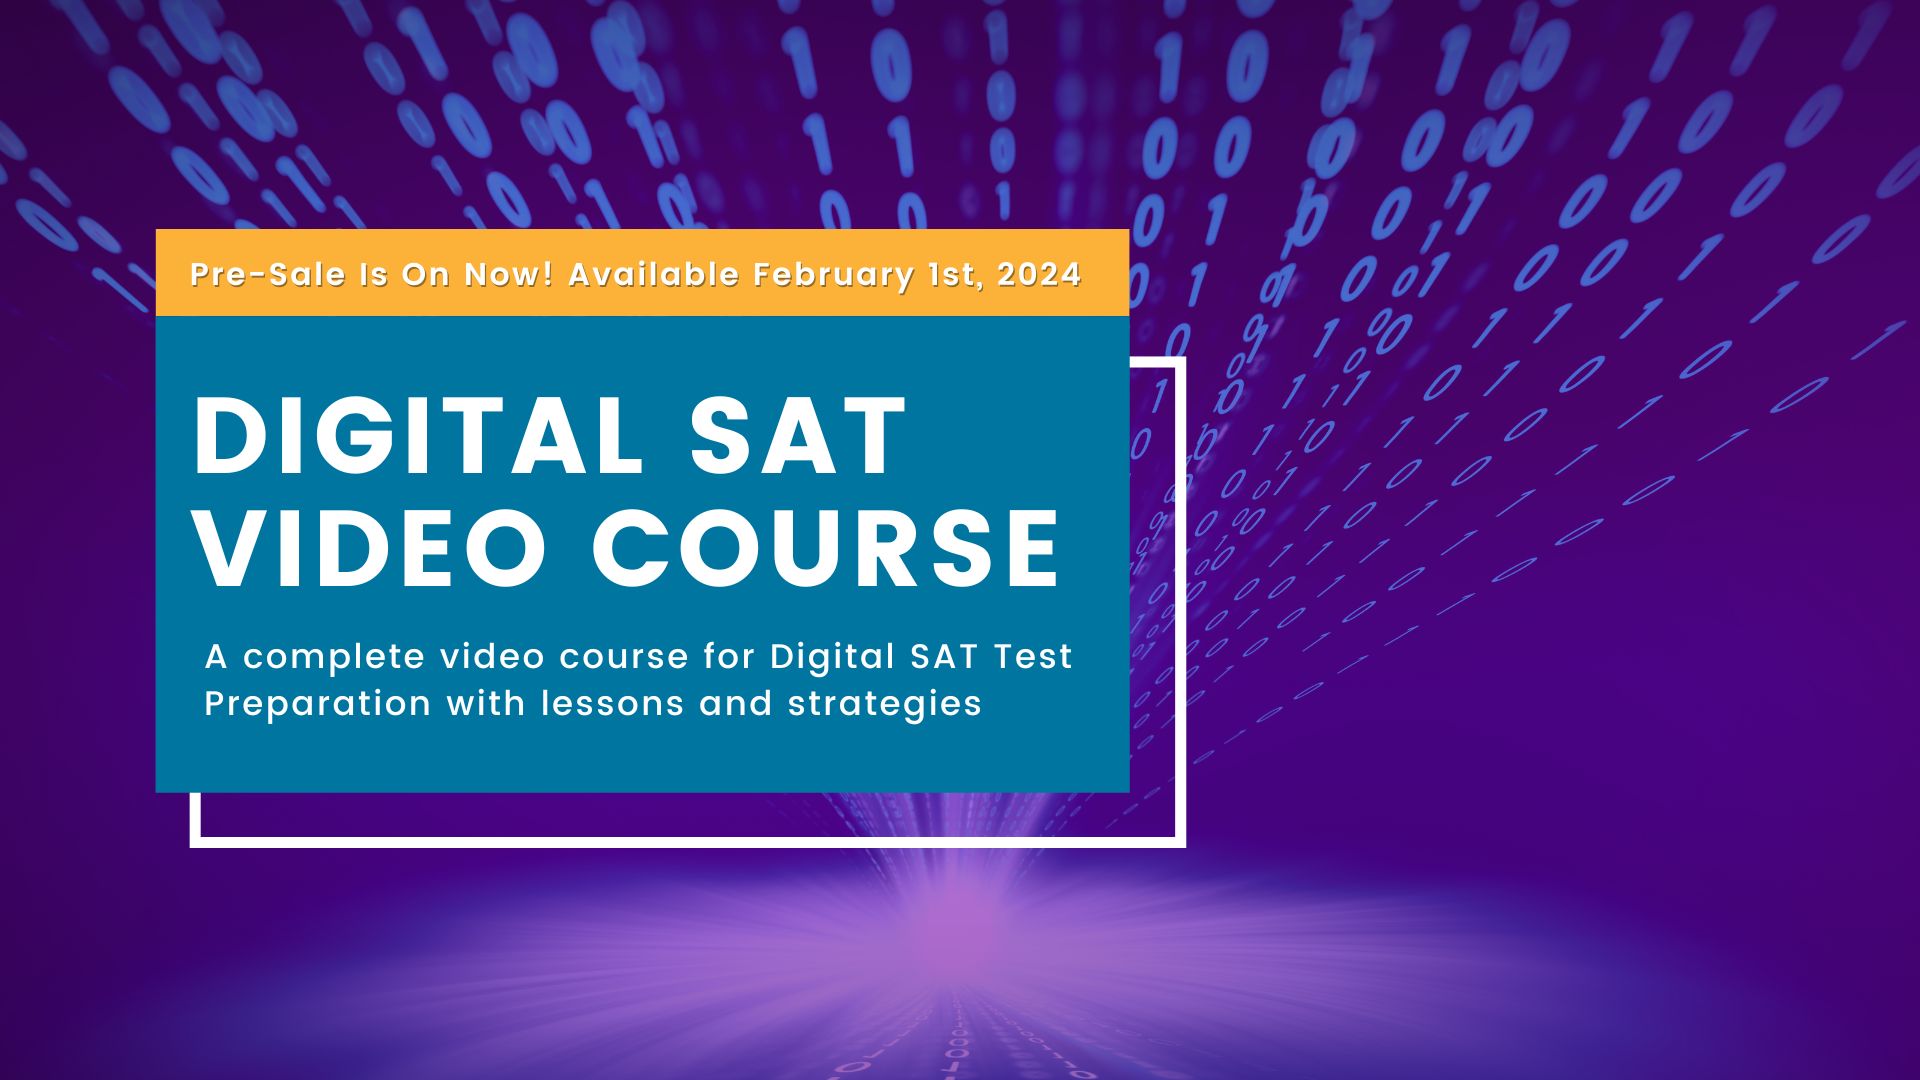 Digital SAT Video Course Available February 1st, 2024